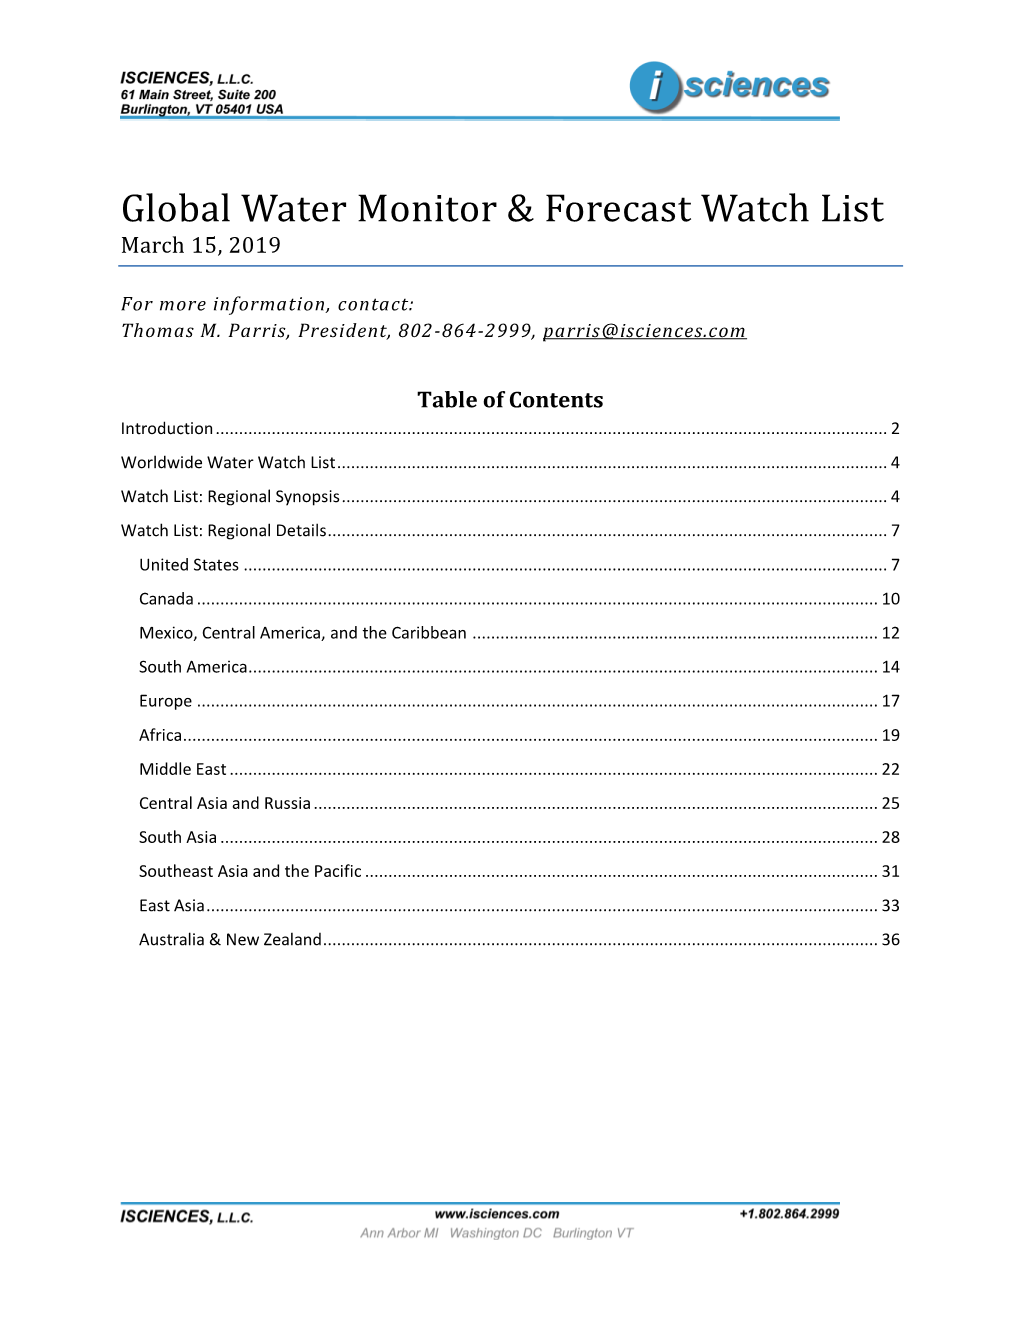 Isciences Global Water Monitor & Forecast Watch List March 15, 2019